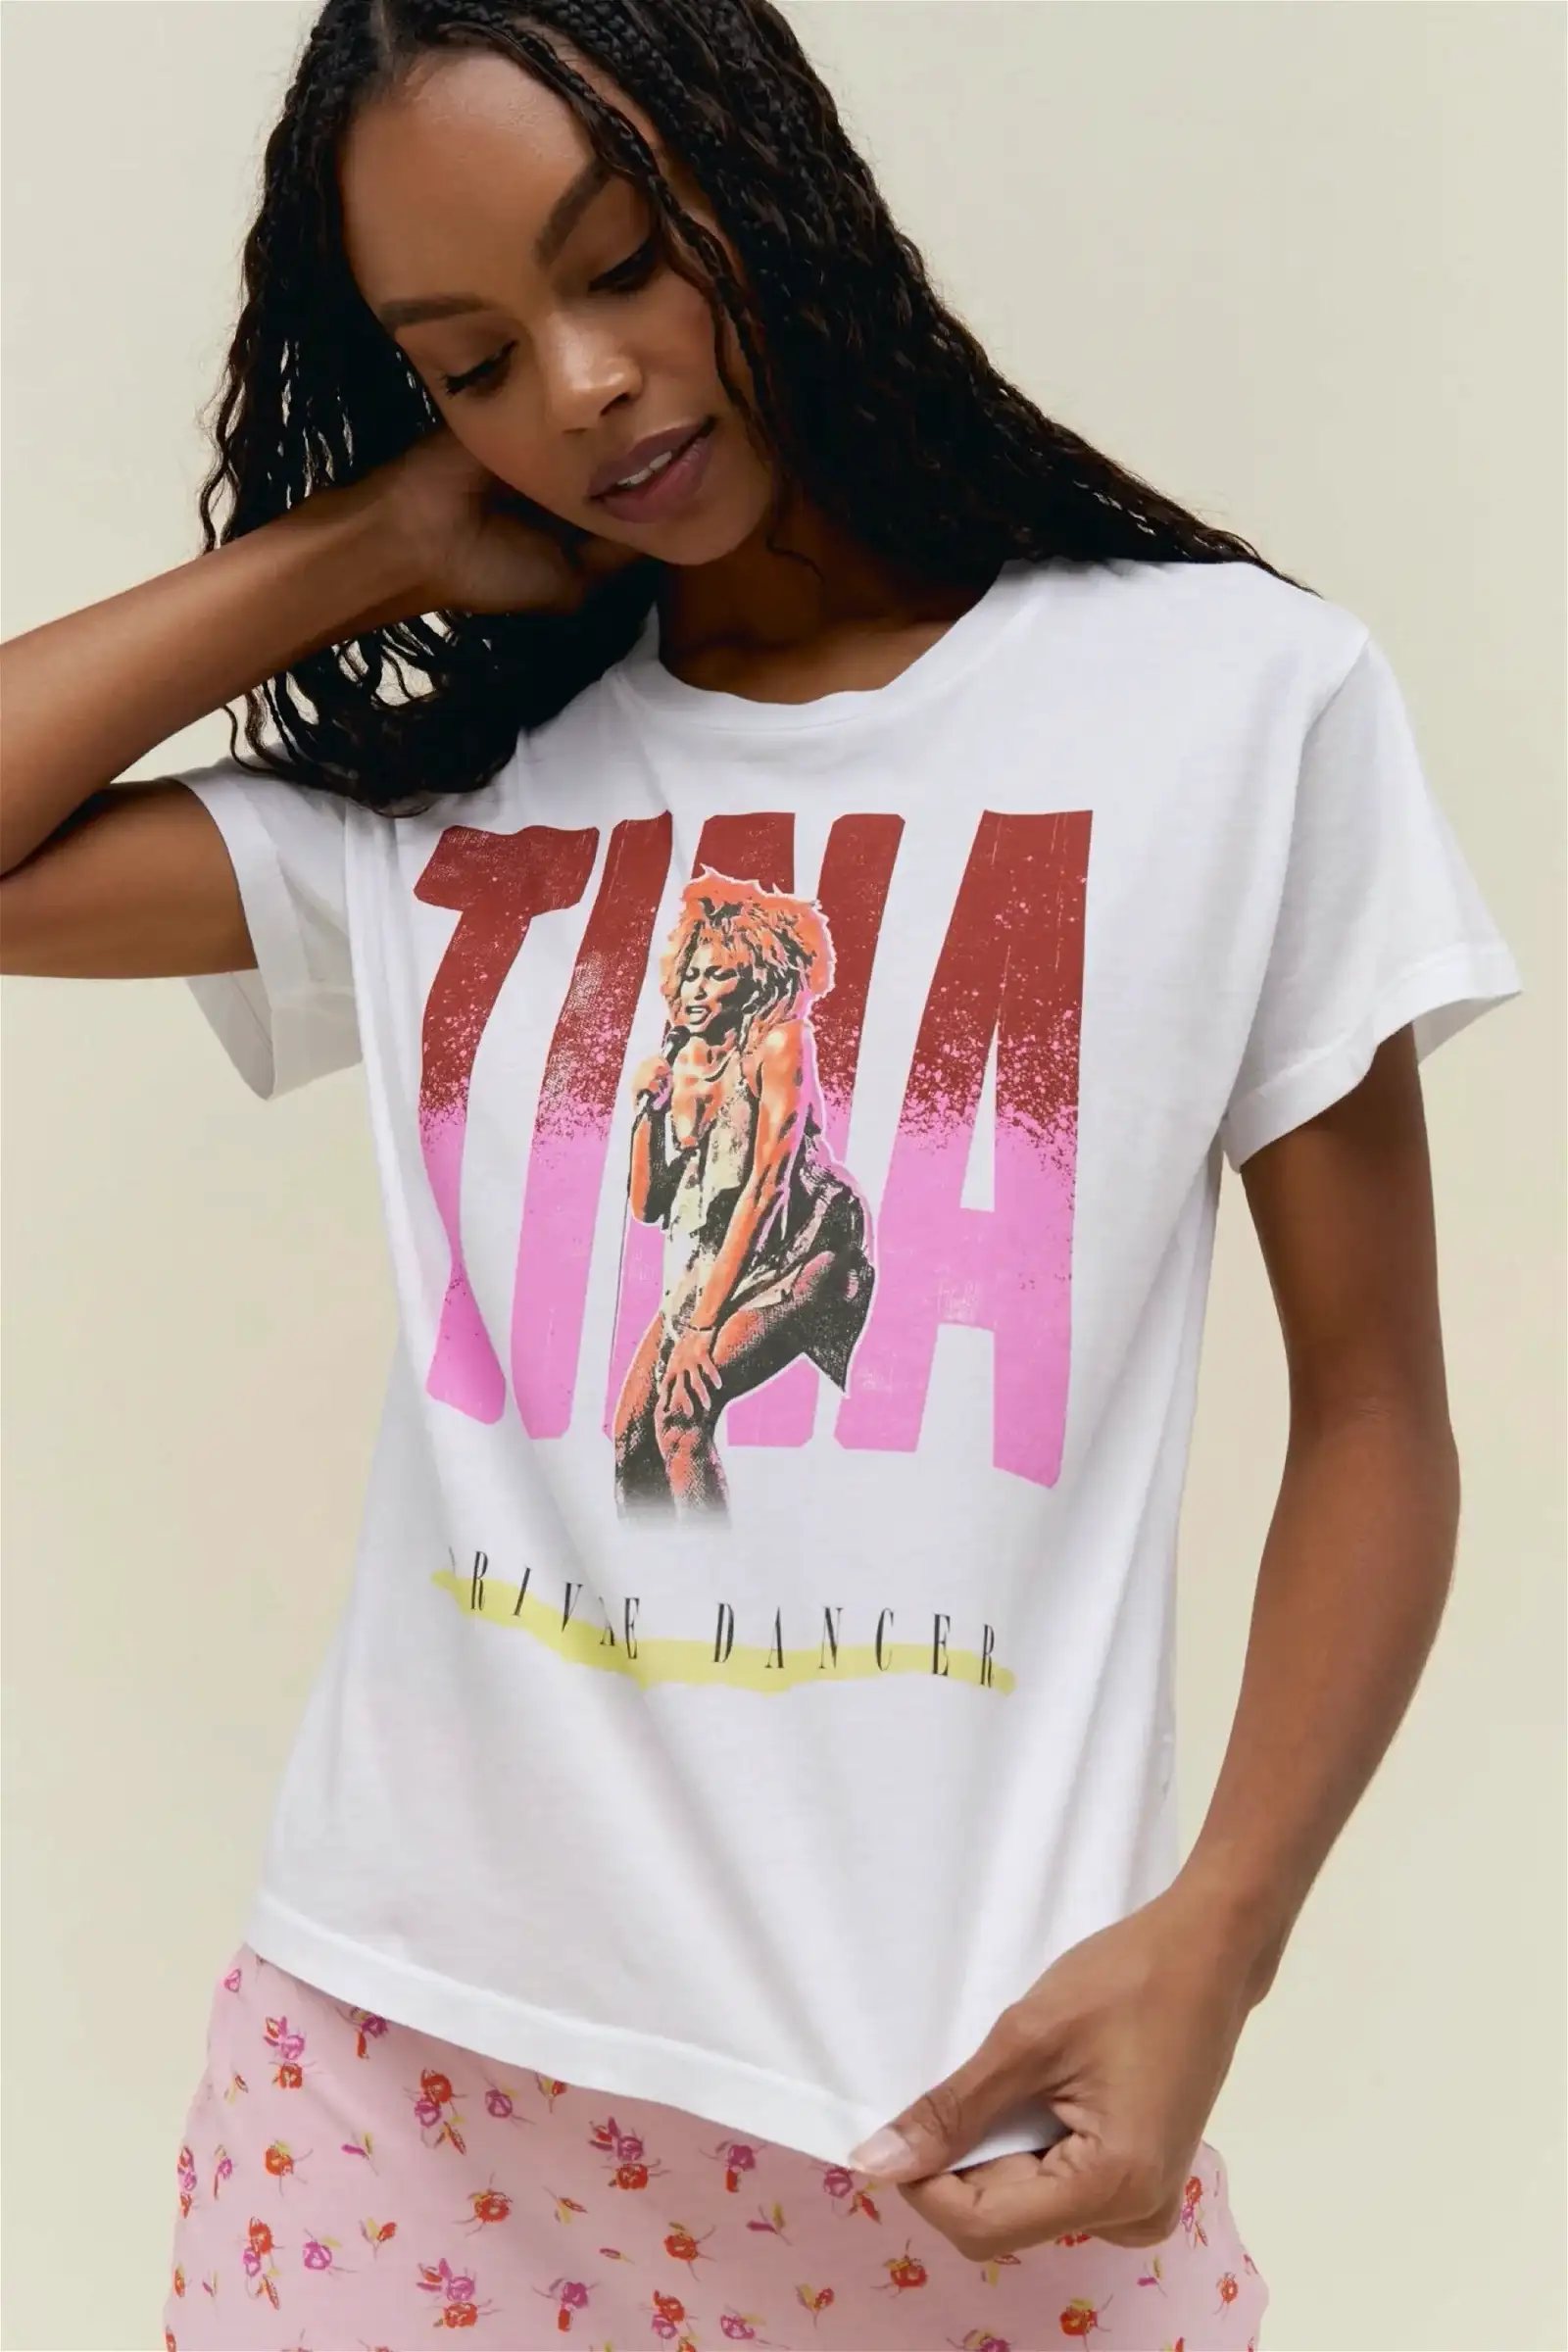 Image of Tina Turner Private Dancer Solo Tee